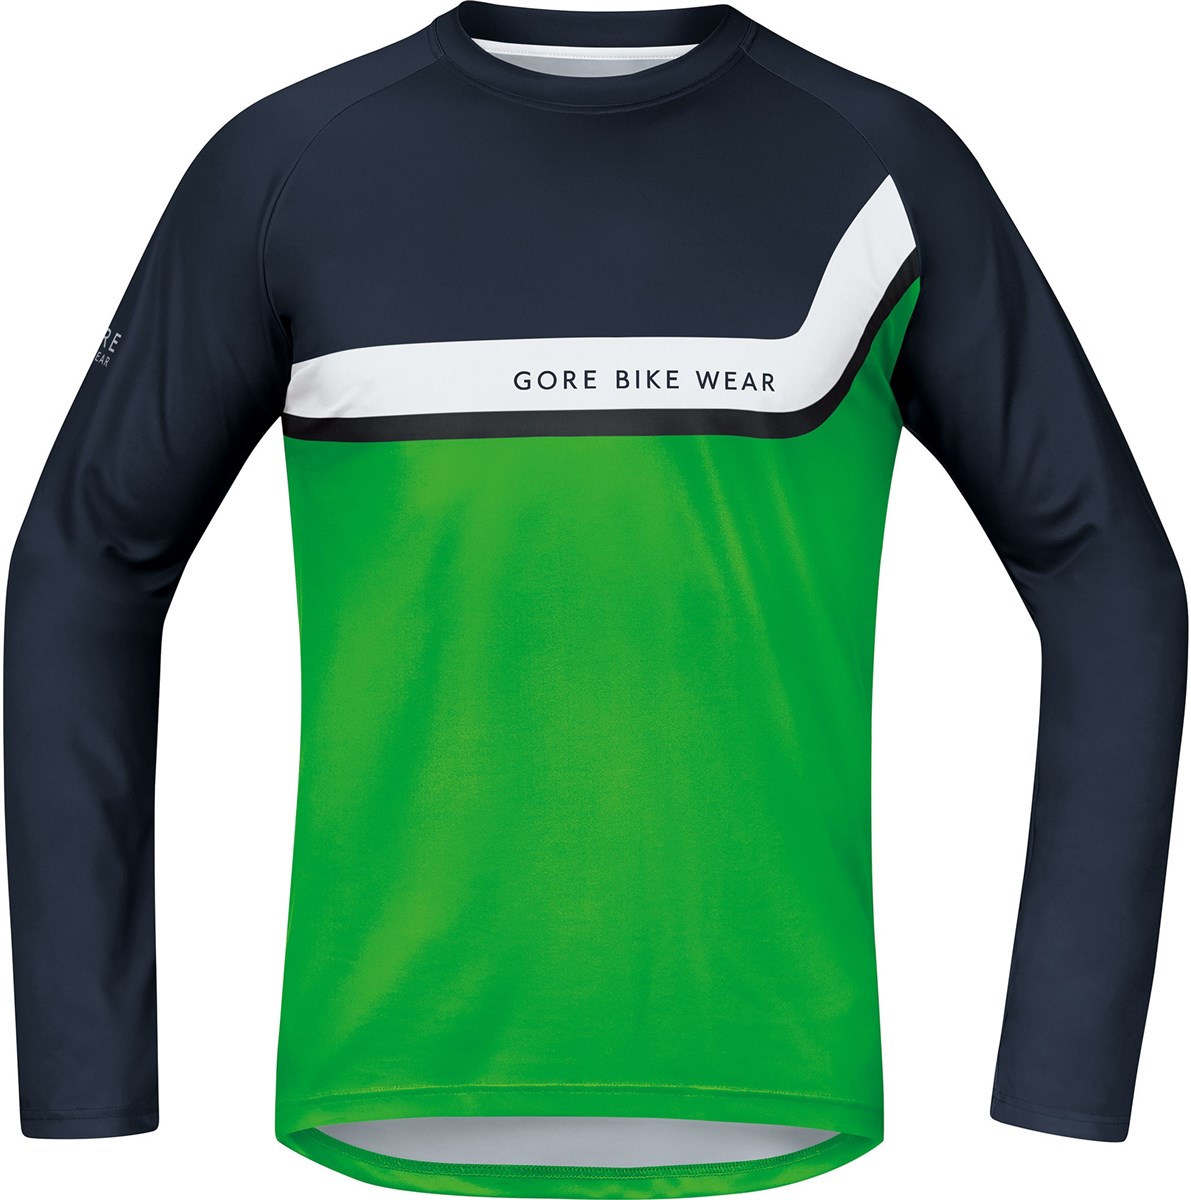 Gore Power Trail Jersey Long AW17 product image